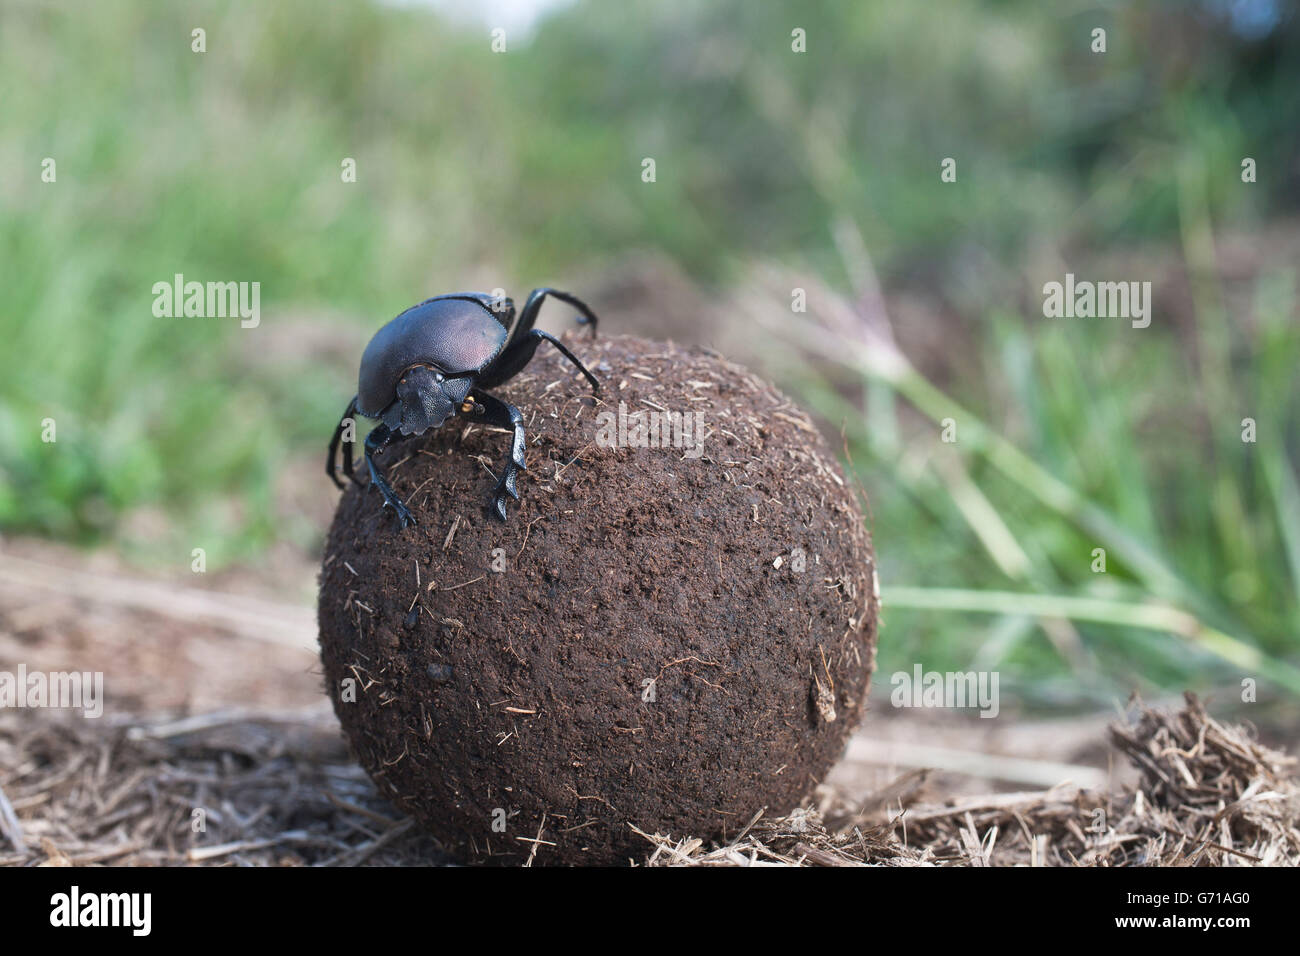 Dung Beetle, rolling ball of dung, Umfolozi-Hluhluwe National Park, South Africa / (Scarabaeus spec.) Stock Photo